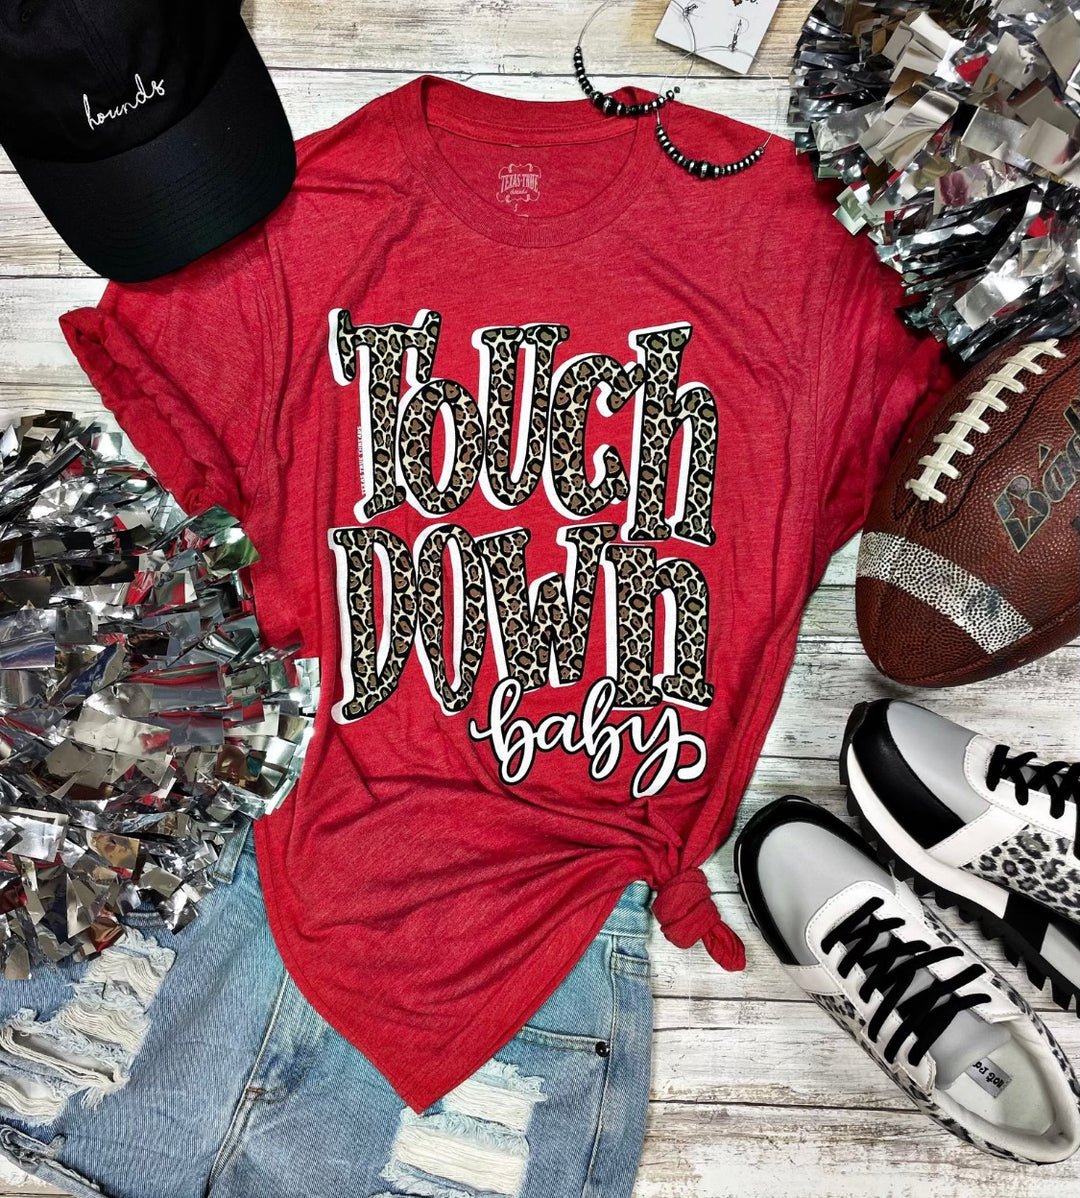 Touch Down Baby Tee by Texas True Threads